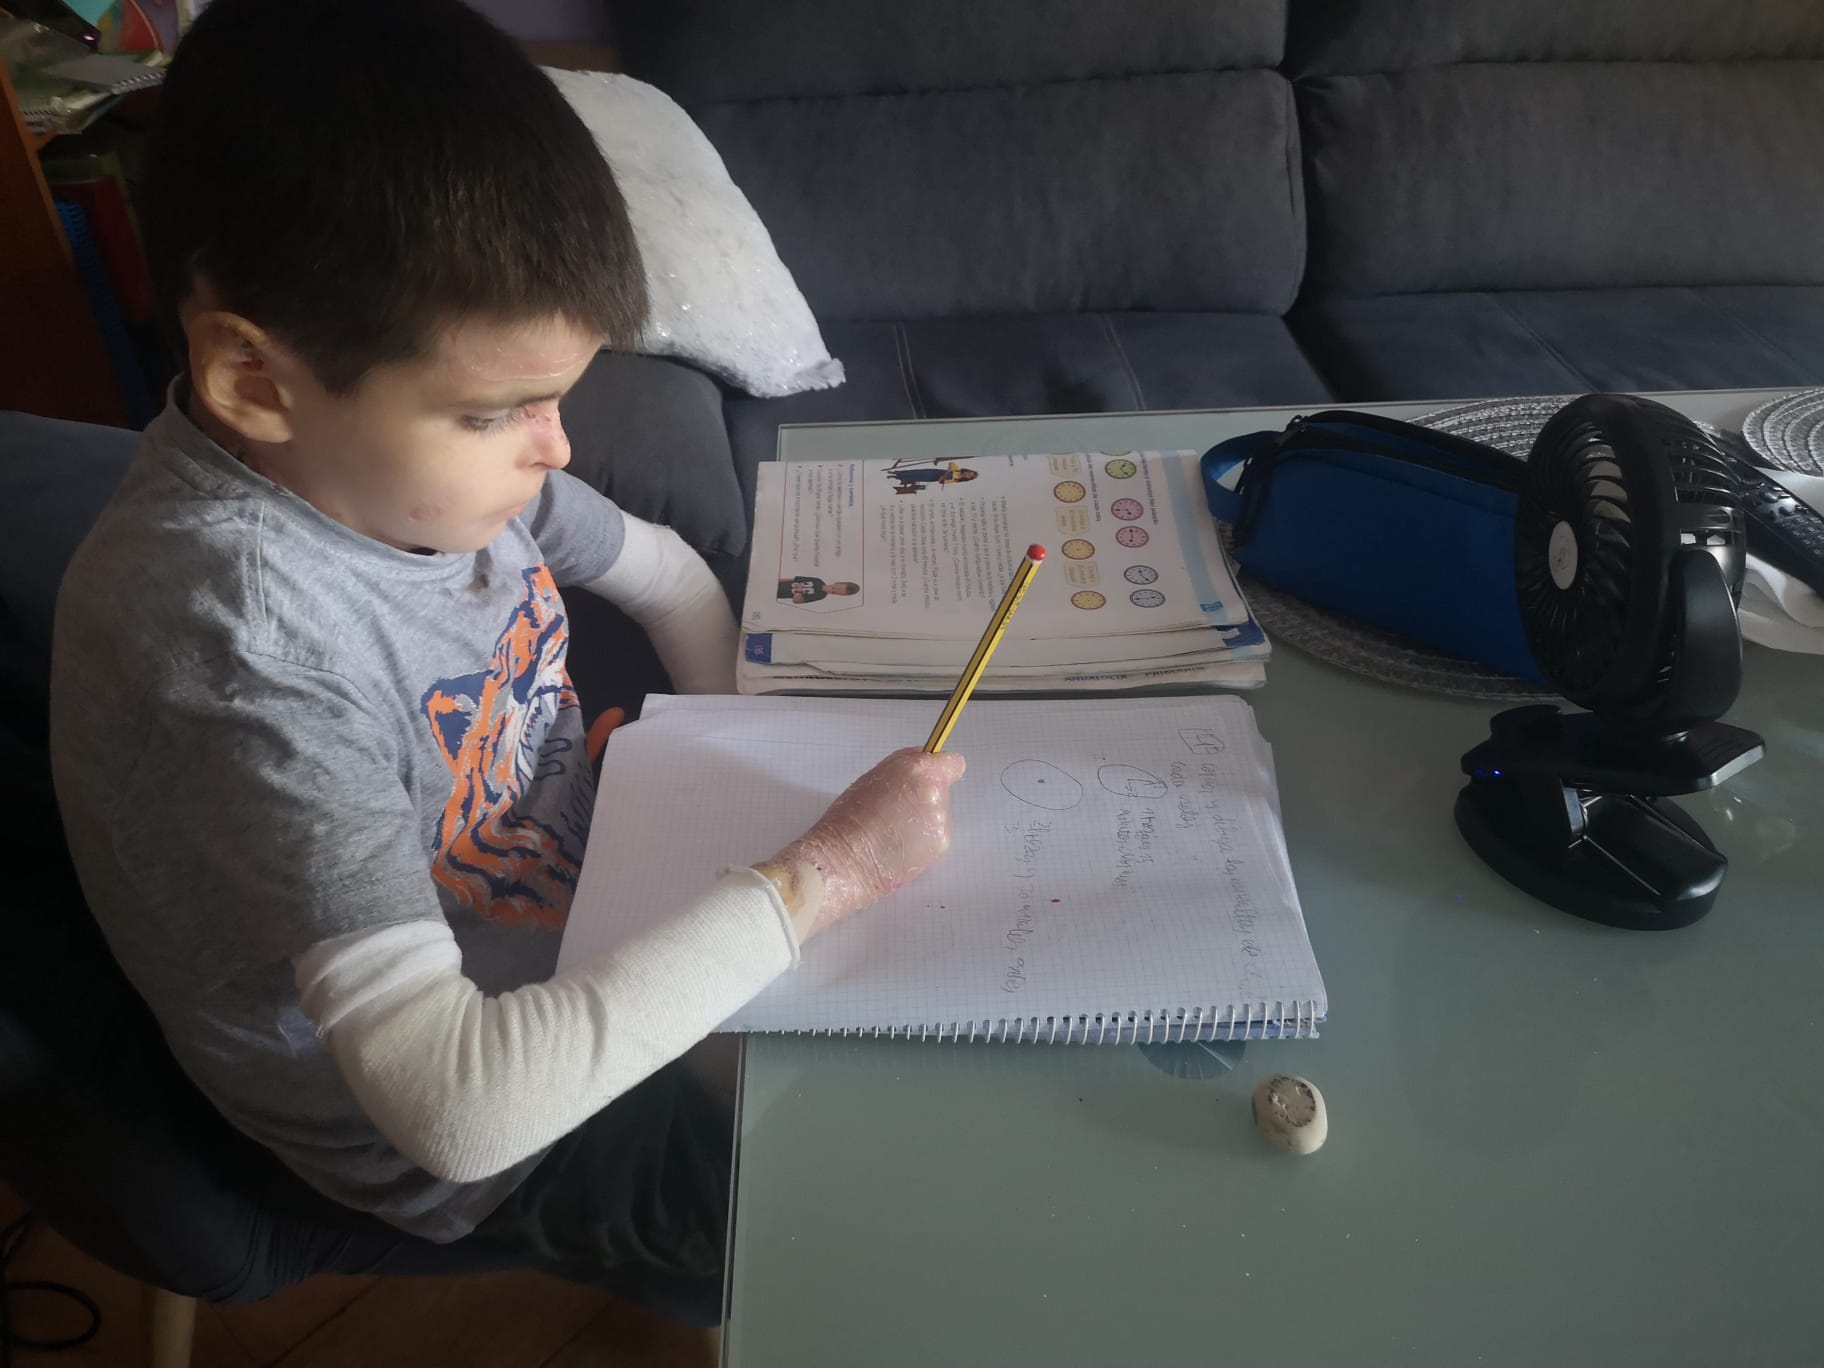 Leo Osorio, 9, who has a physical disability, does his homework in his living room in Seville (Andalusia Spain), using a small fan to stay cool.